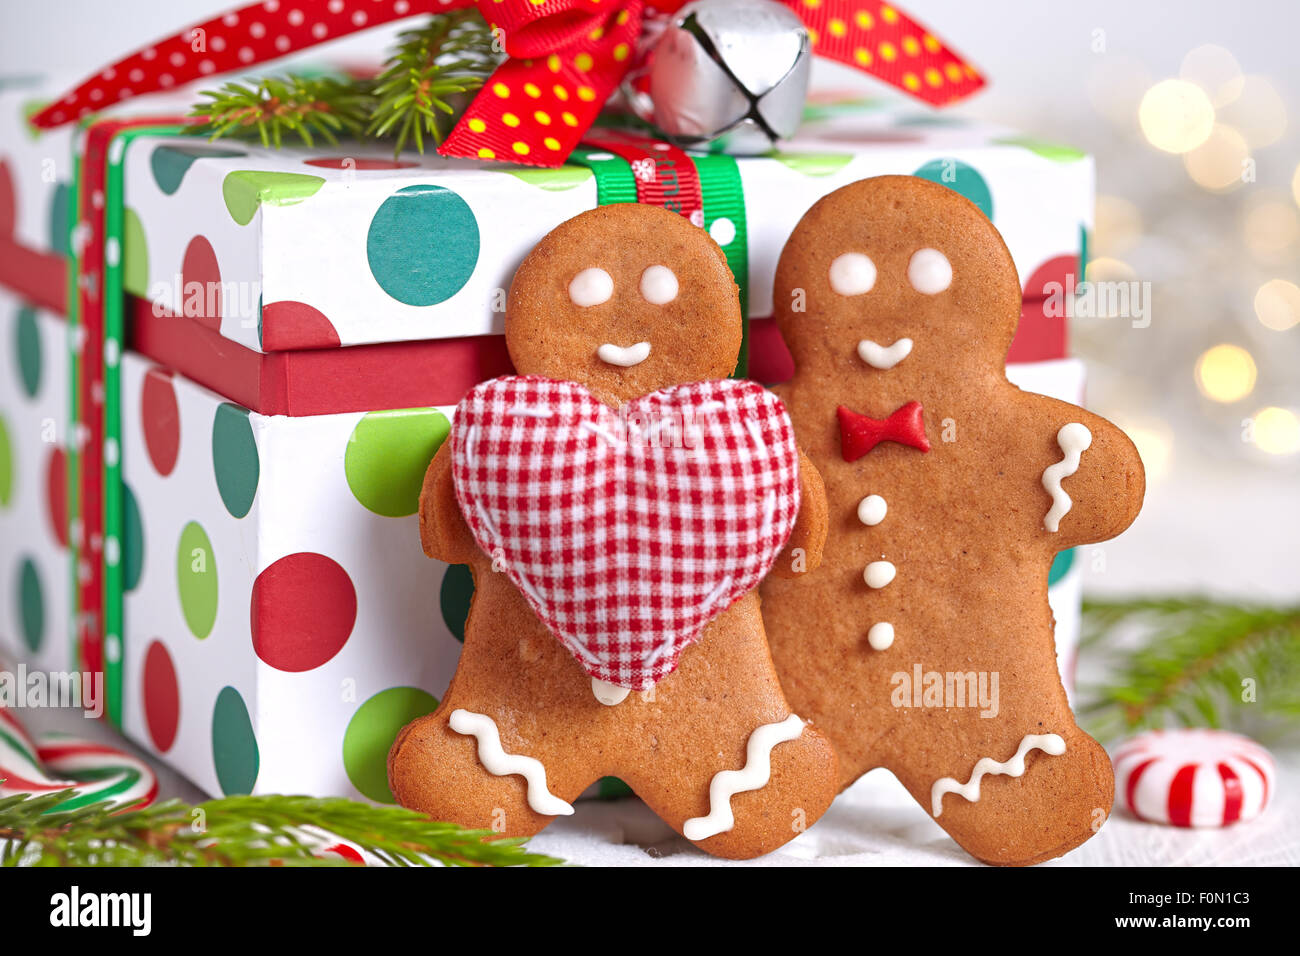 Christmas Decorations with Gingerbread man Stock Photo